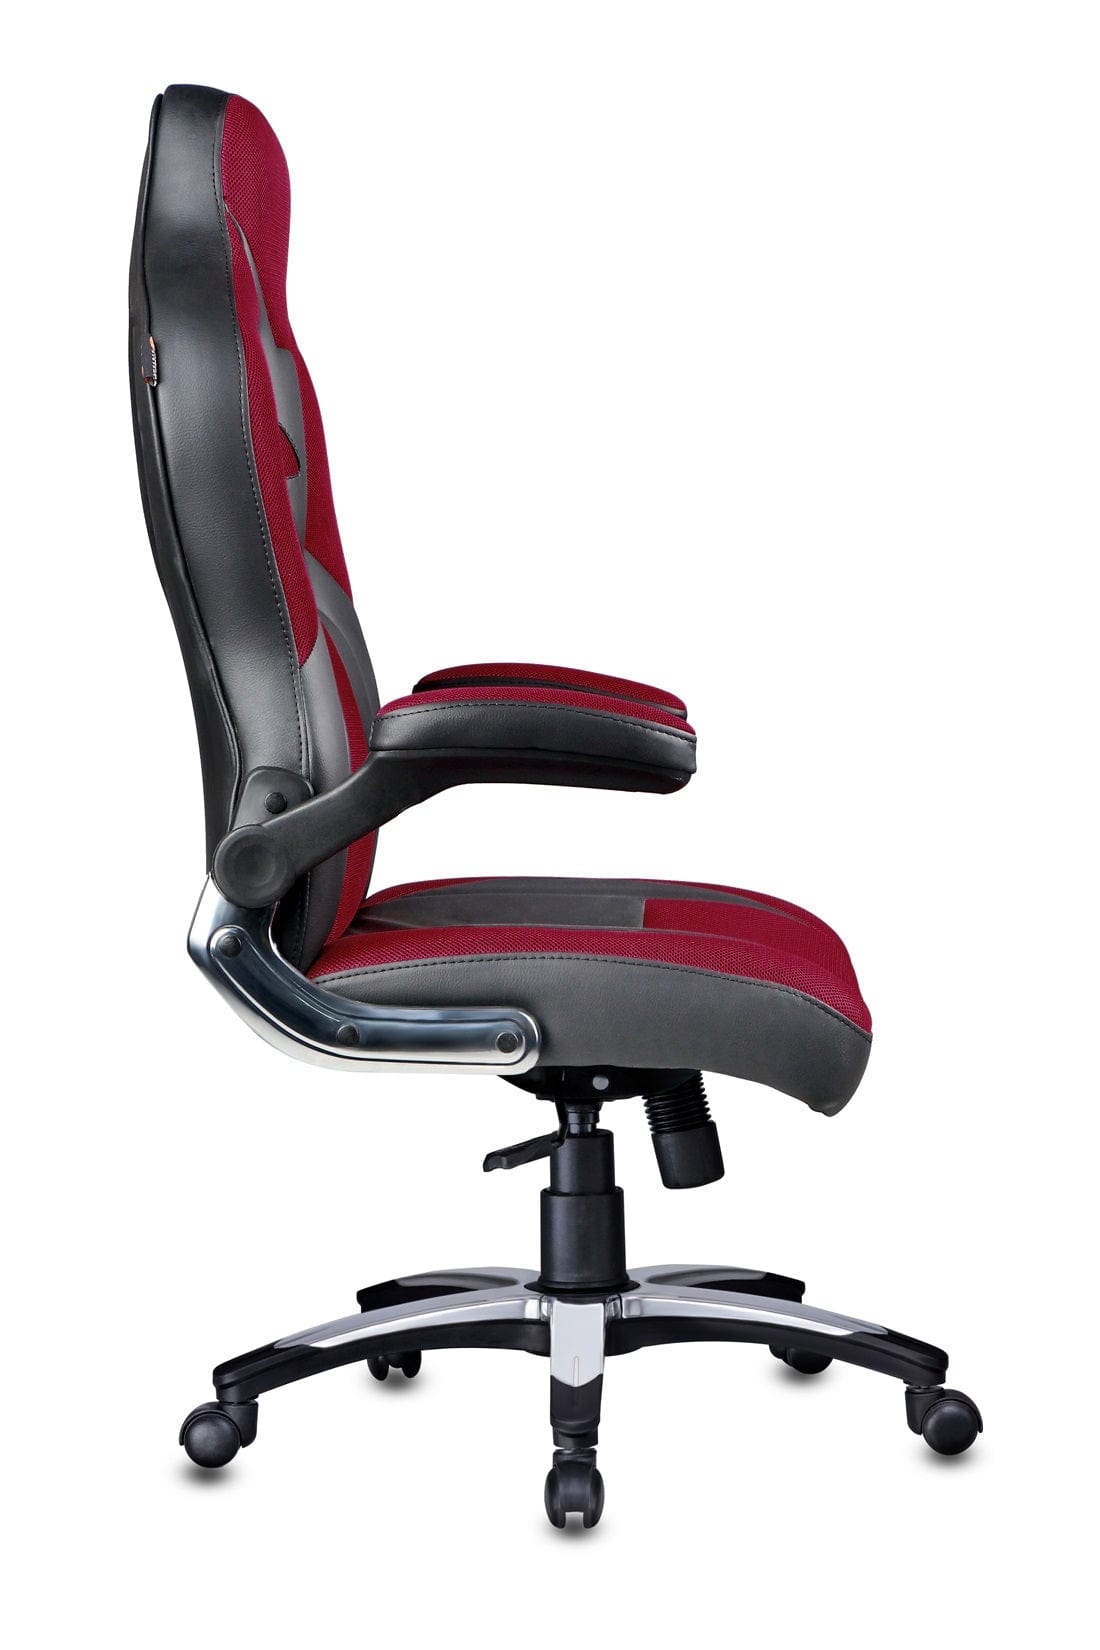 Stylish Designer Office chair in Black / Red